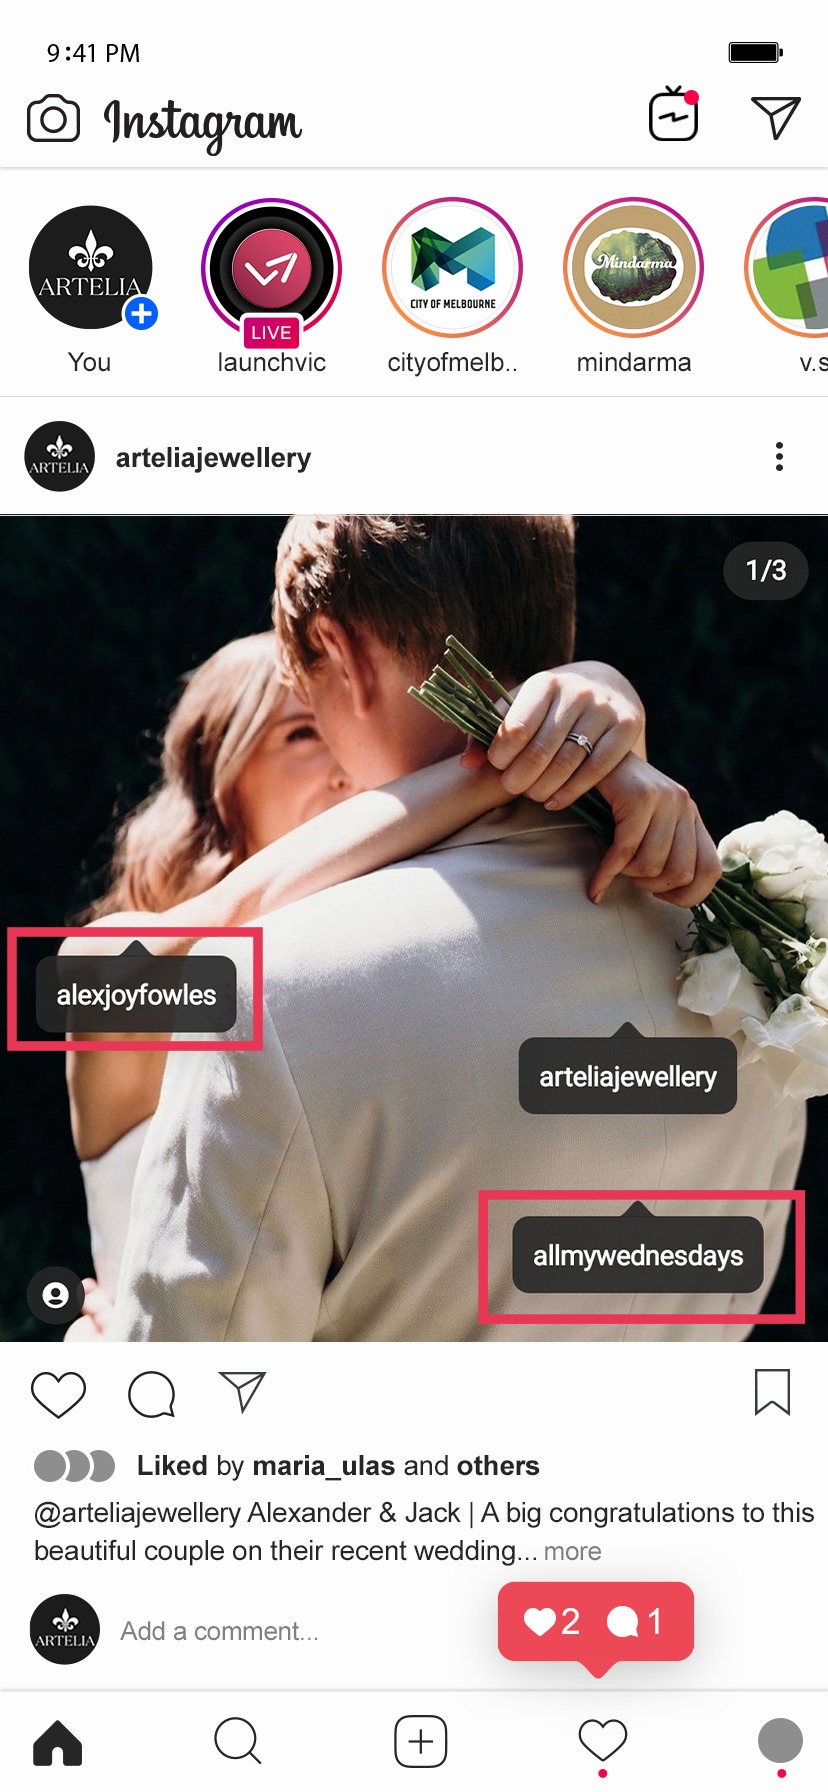 Screenshot of a wedding photo from arteliajewellery on Instagram. The images shows two other accounts being tagged in the photo.